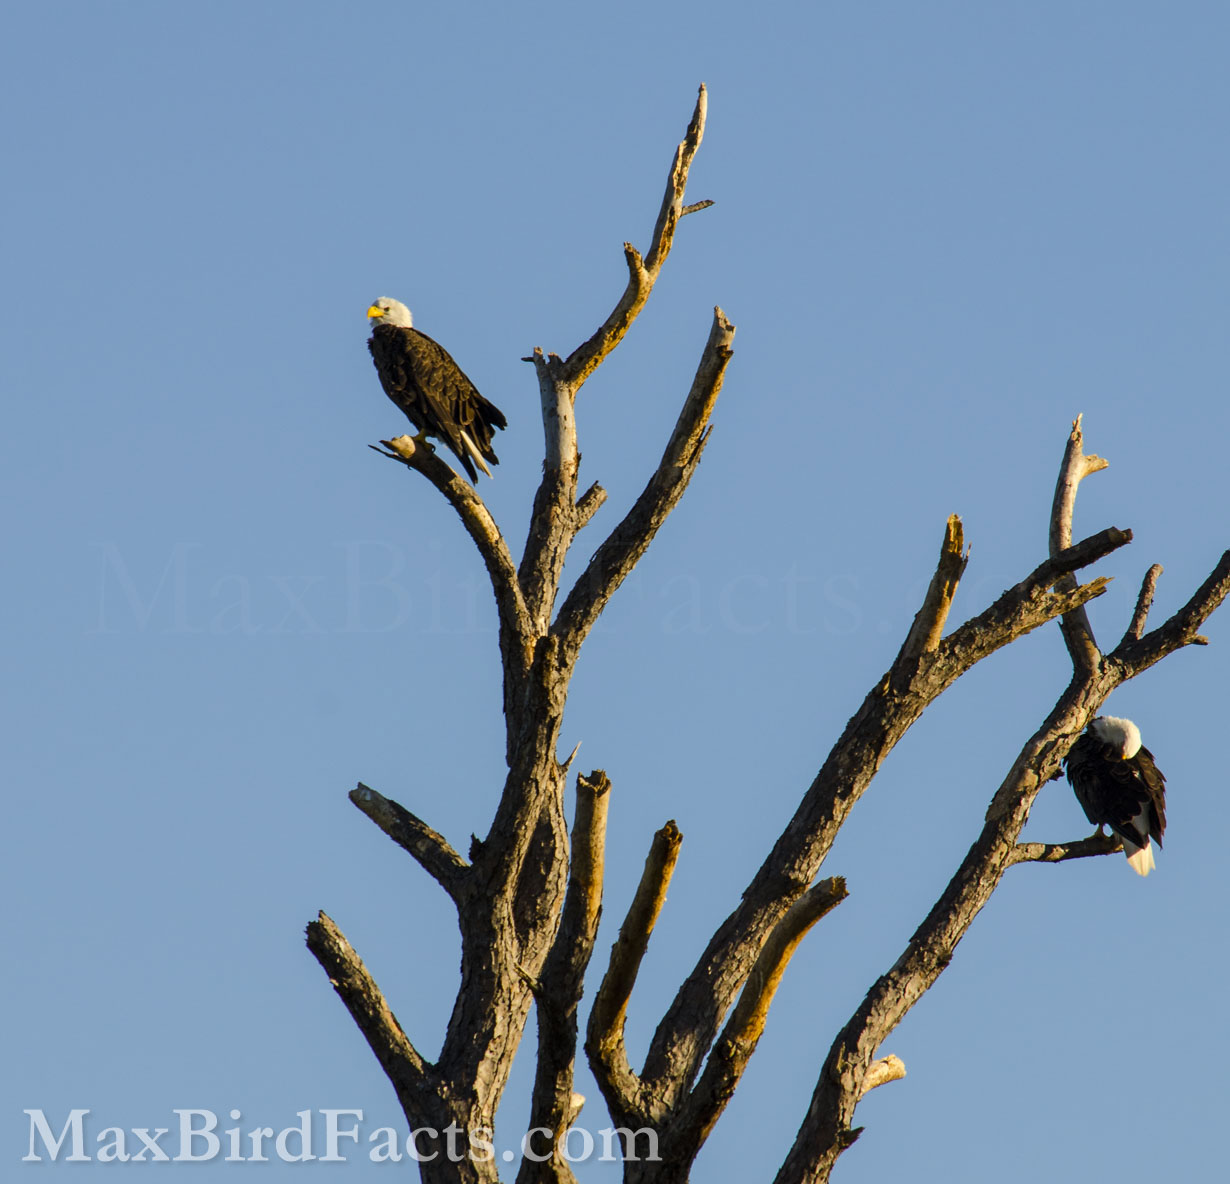 Breeding pairs will remain together consistently, especially during their nesting season. Bald Eagles nest from October through May in Florida, and many other southern states, but the peak of nesting is in our winter months. (Titusville, FL. 2019)